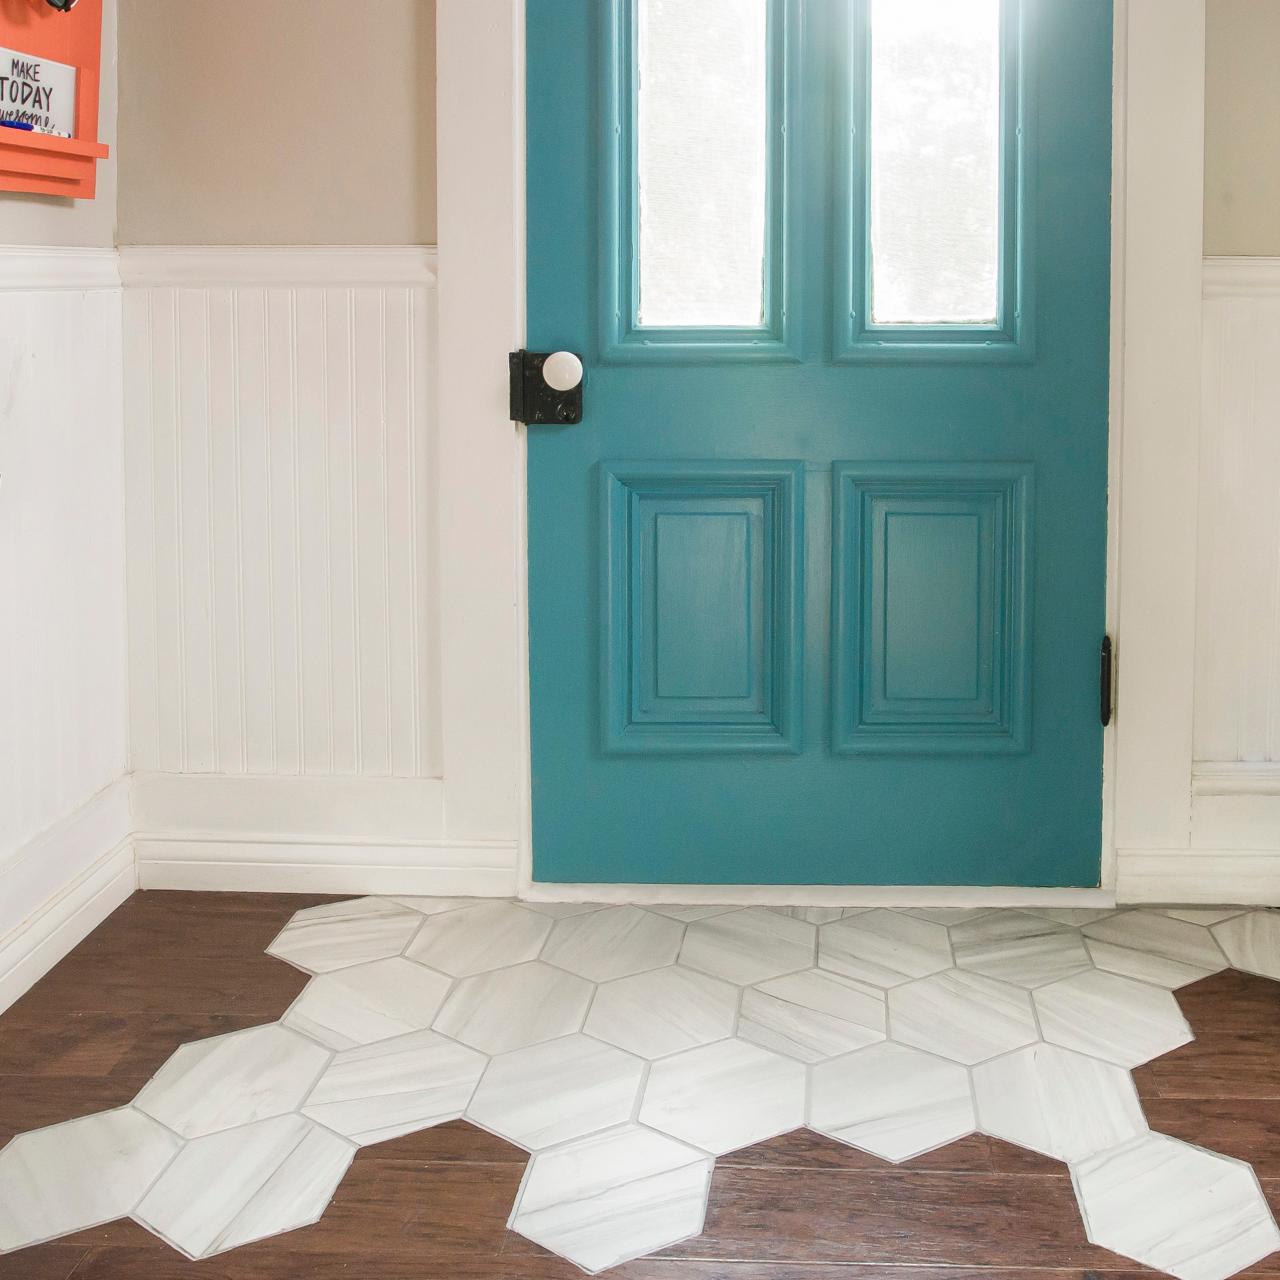 Tile Rugs: Decorative Features for Your Floor